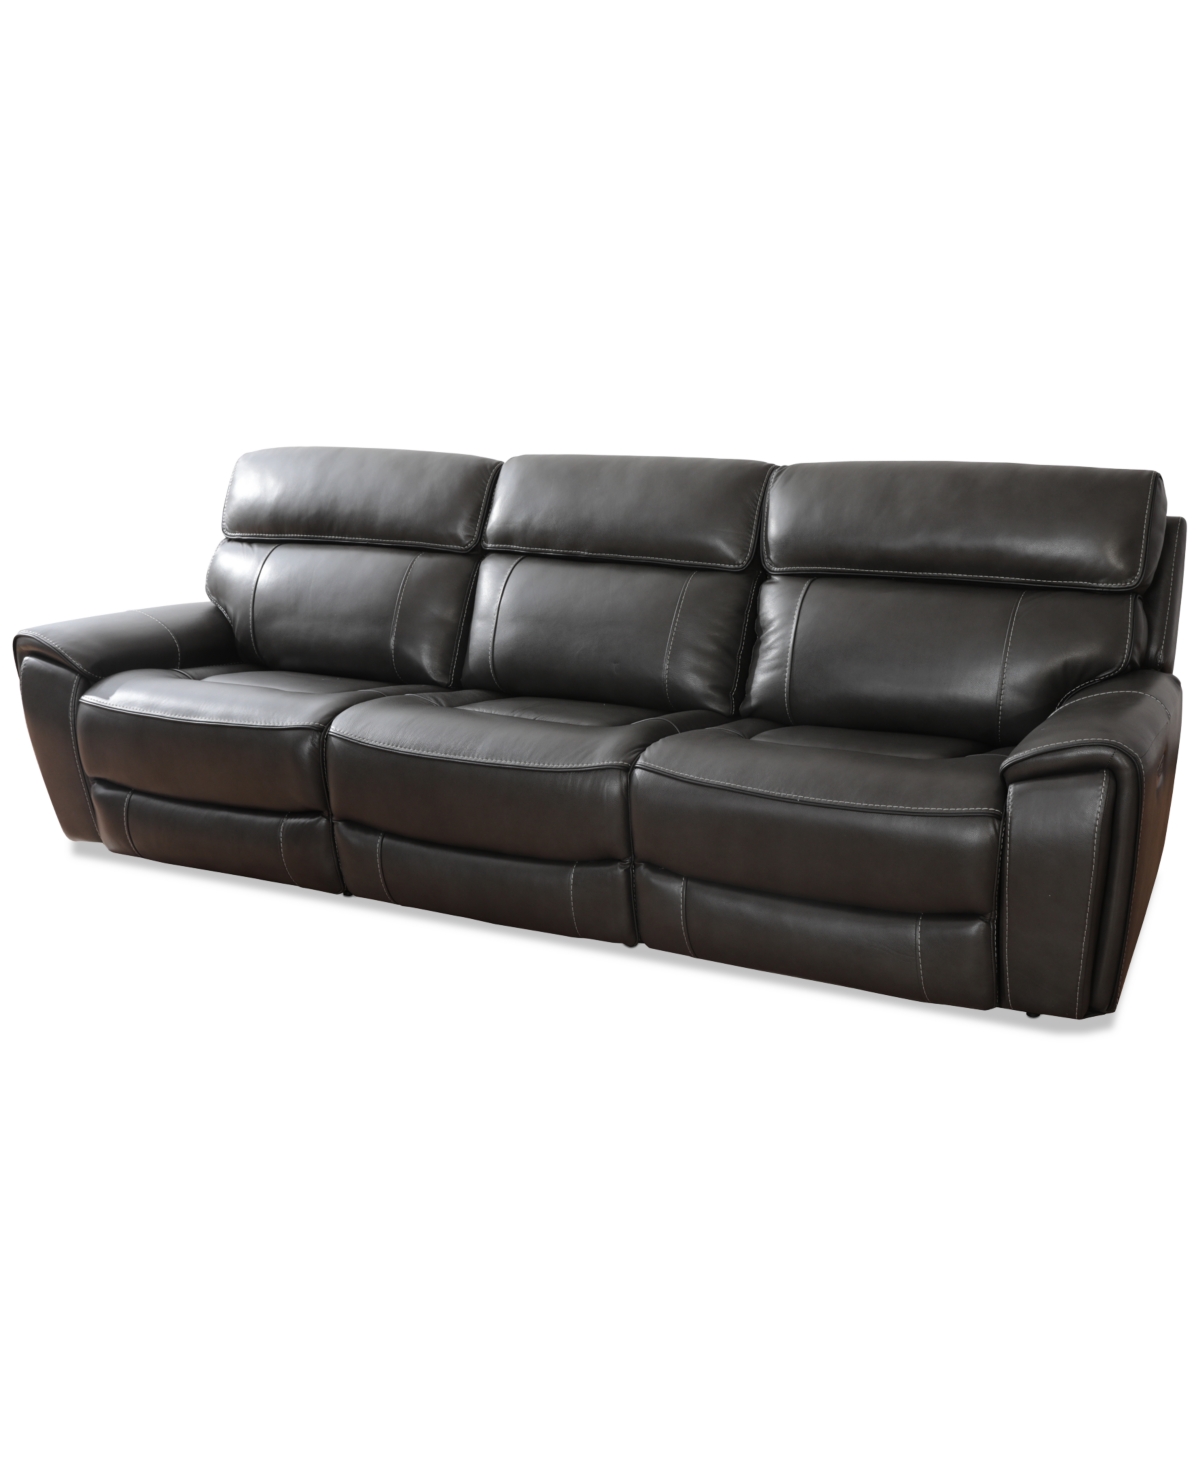 Macy's Hutchenson 115" 3-pc. Zero Gravity Leather Sofa With 2 Power Recliners, Created For  In Grey